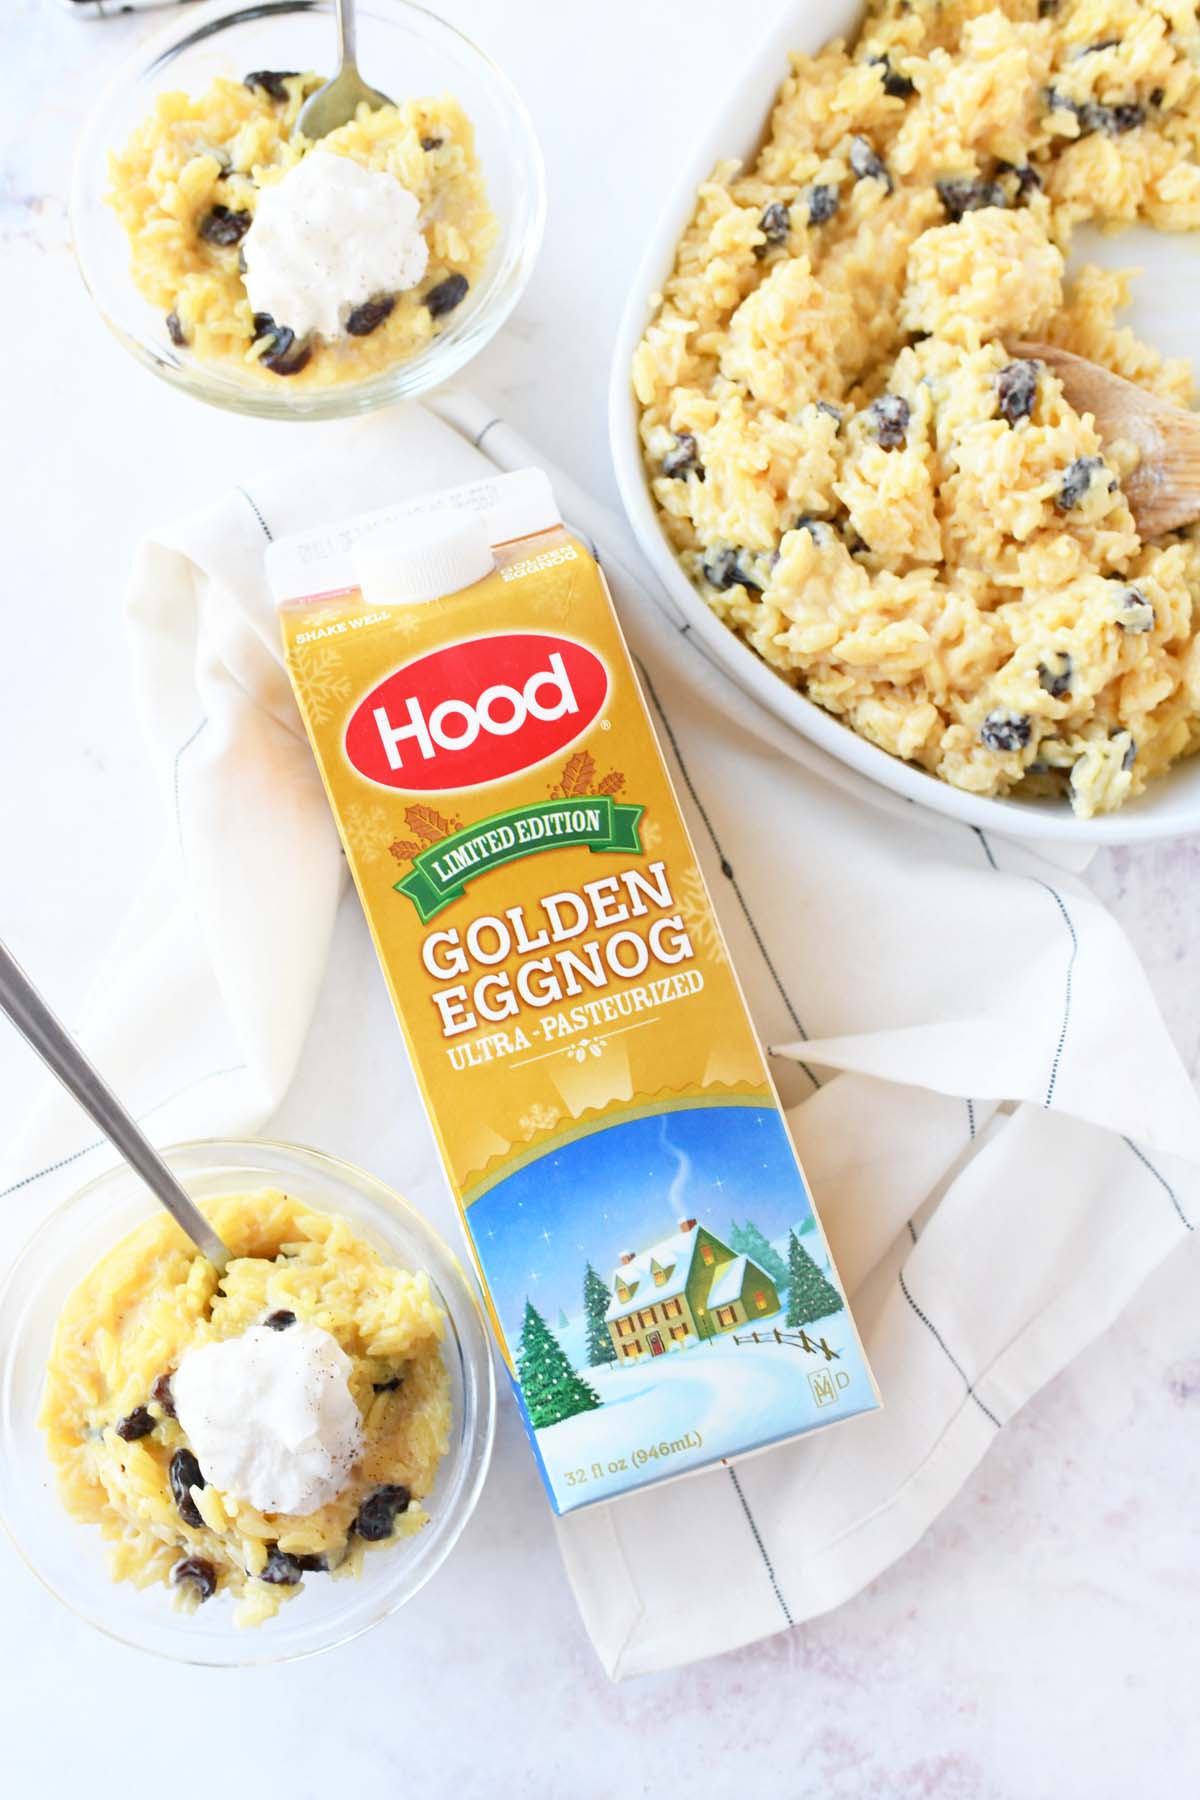 Hood eggnog with rice pudding on a white table.